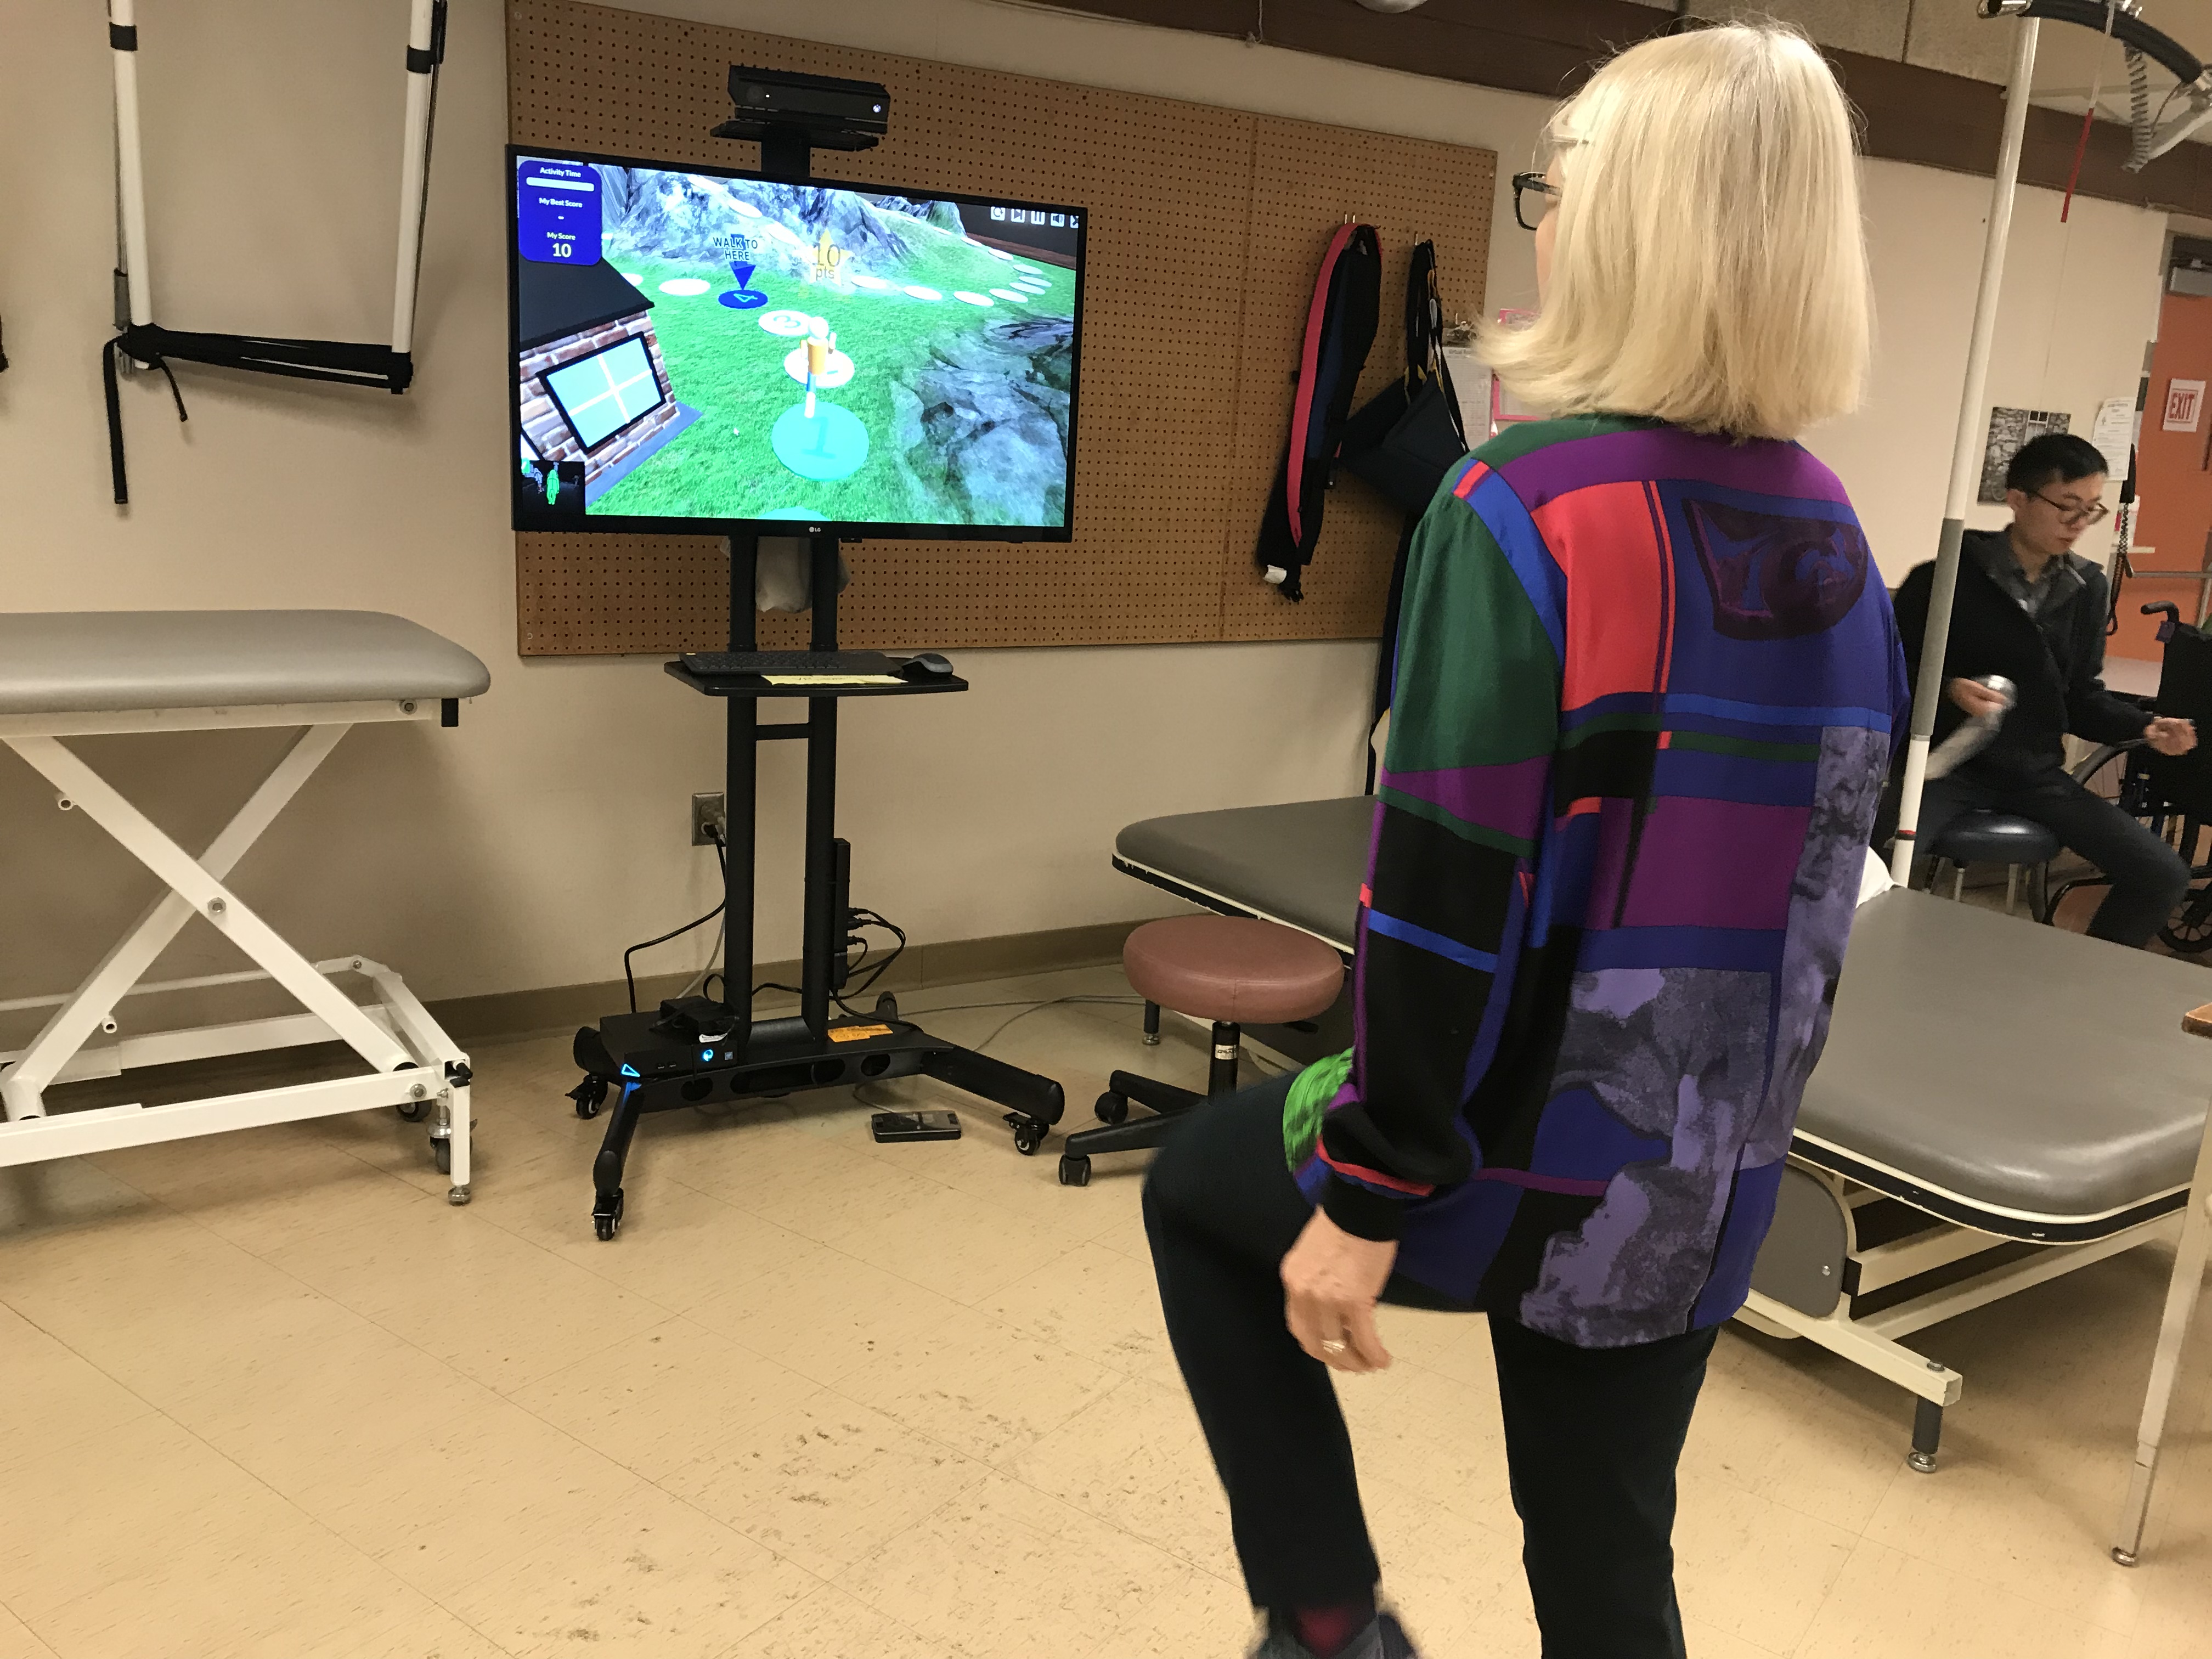 Occupational Therapist Lori Sinclair shows off the new virtual reality system.